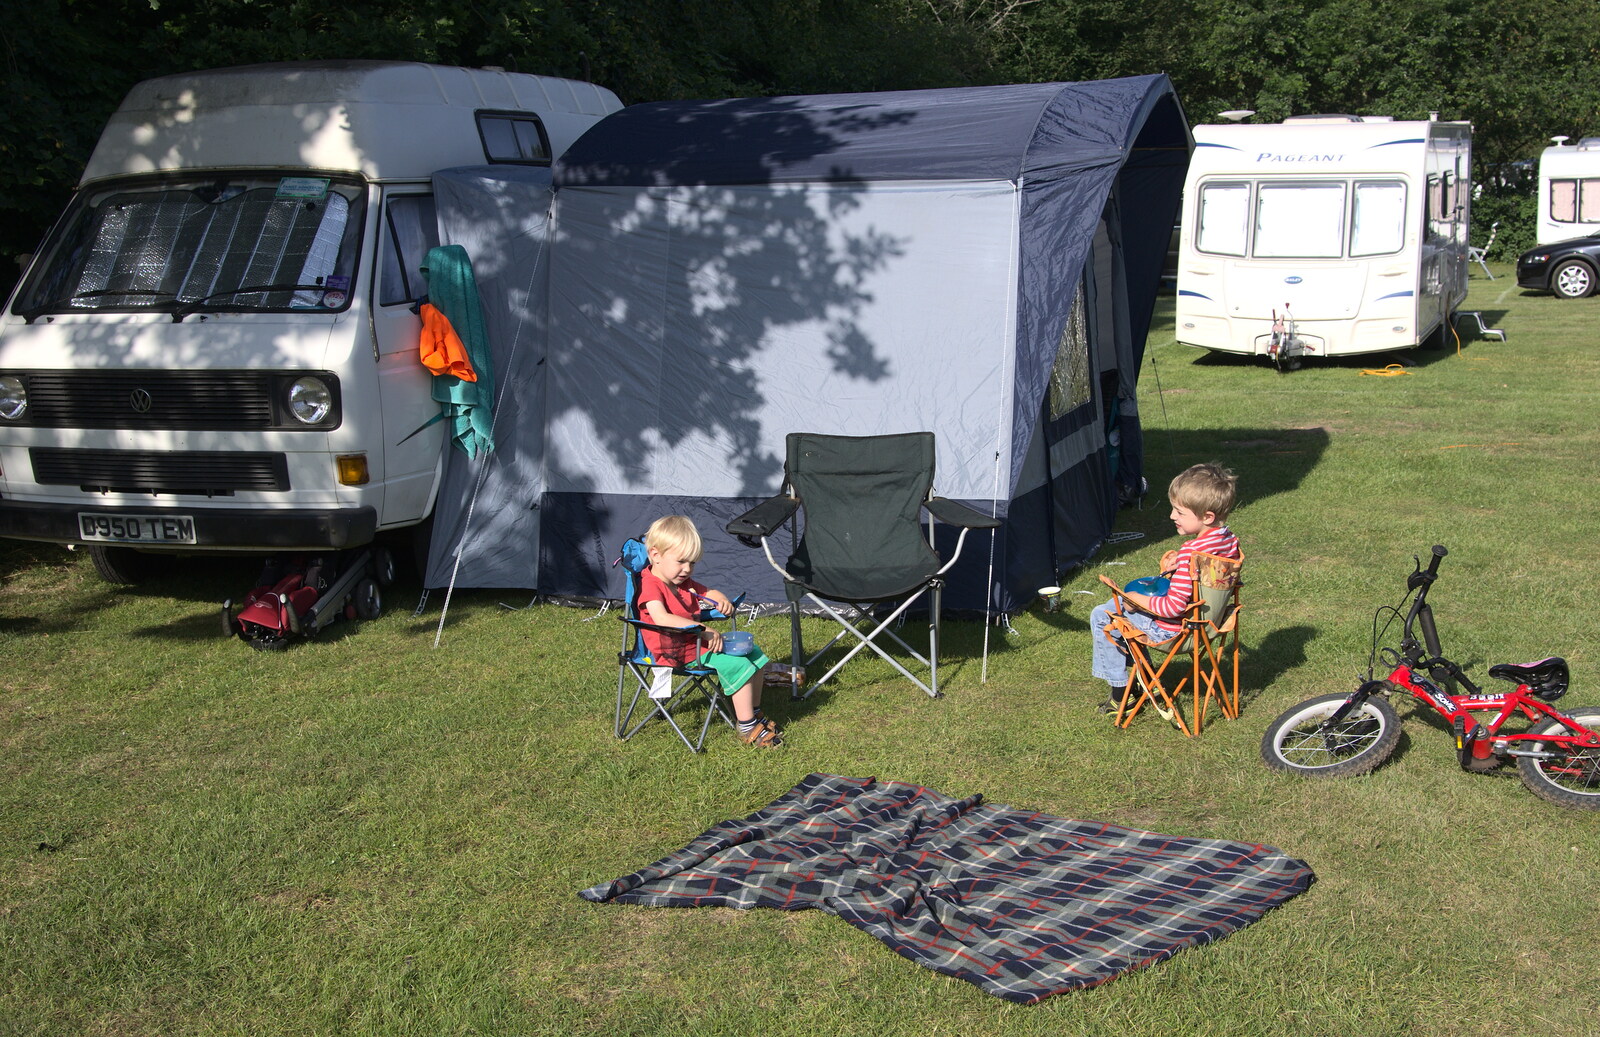 The boys and the van from A Weekend in the Camper Van, West Harling, Norfolk - 21st June 2014